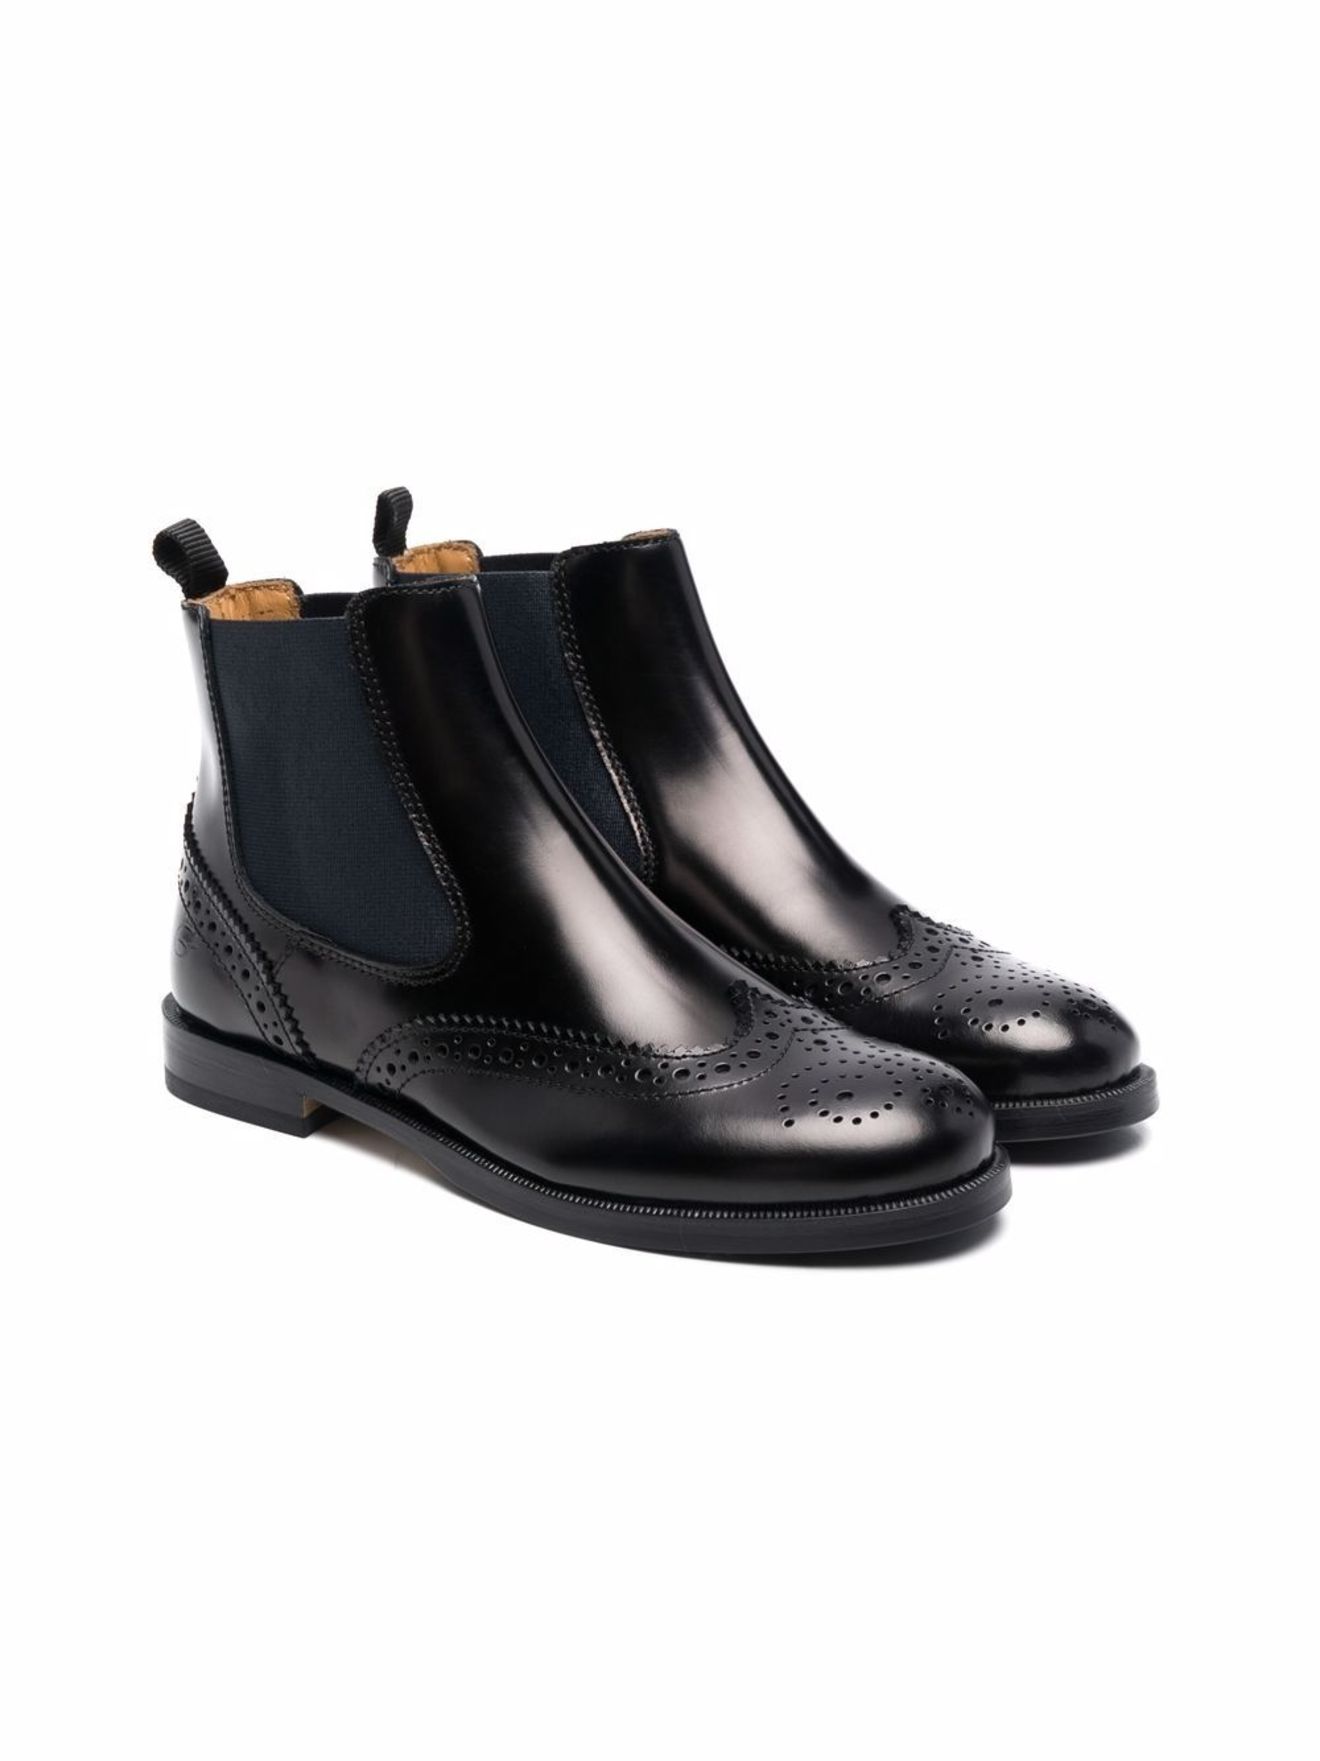 Gallucci Kids brogue leather ankle boots black | MODES